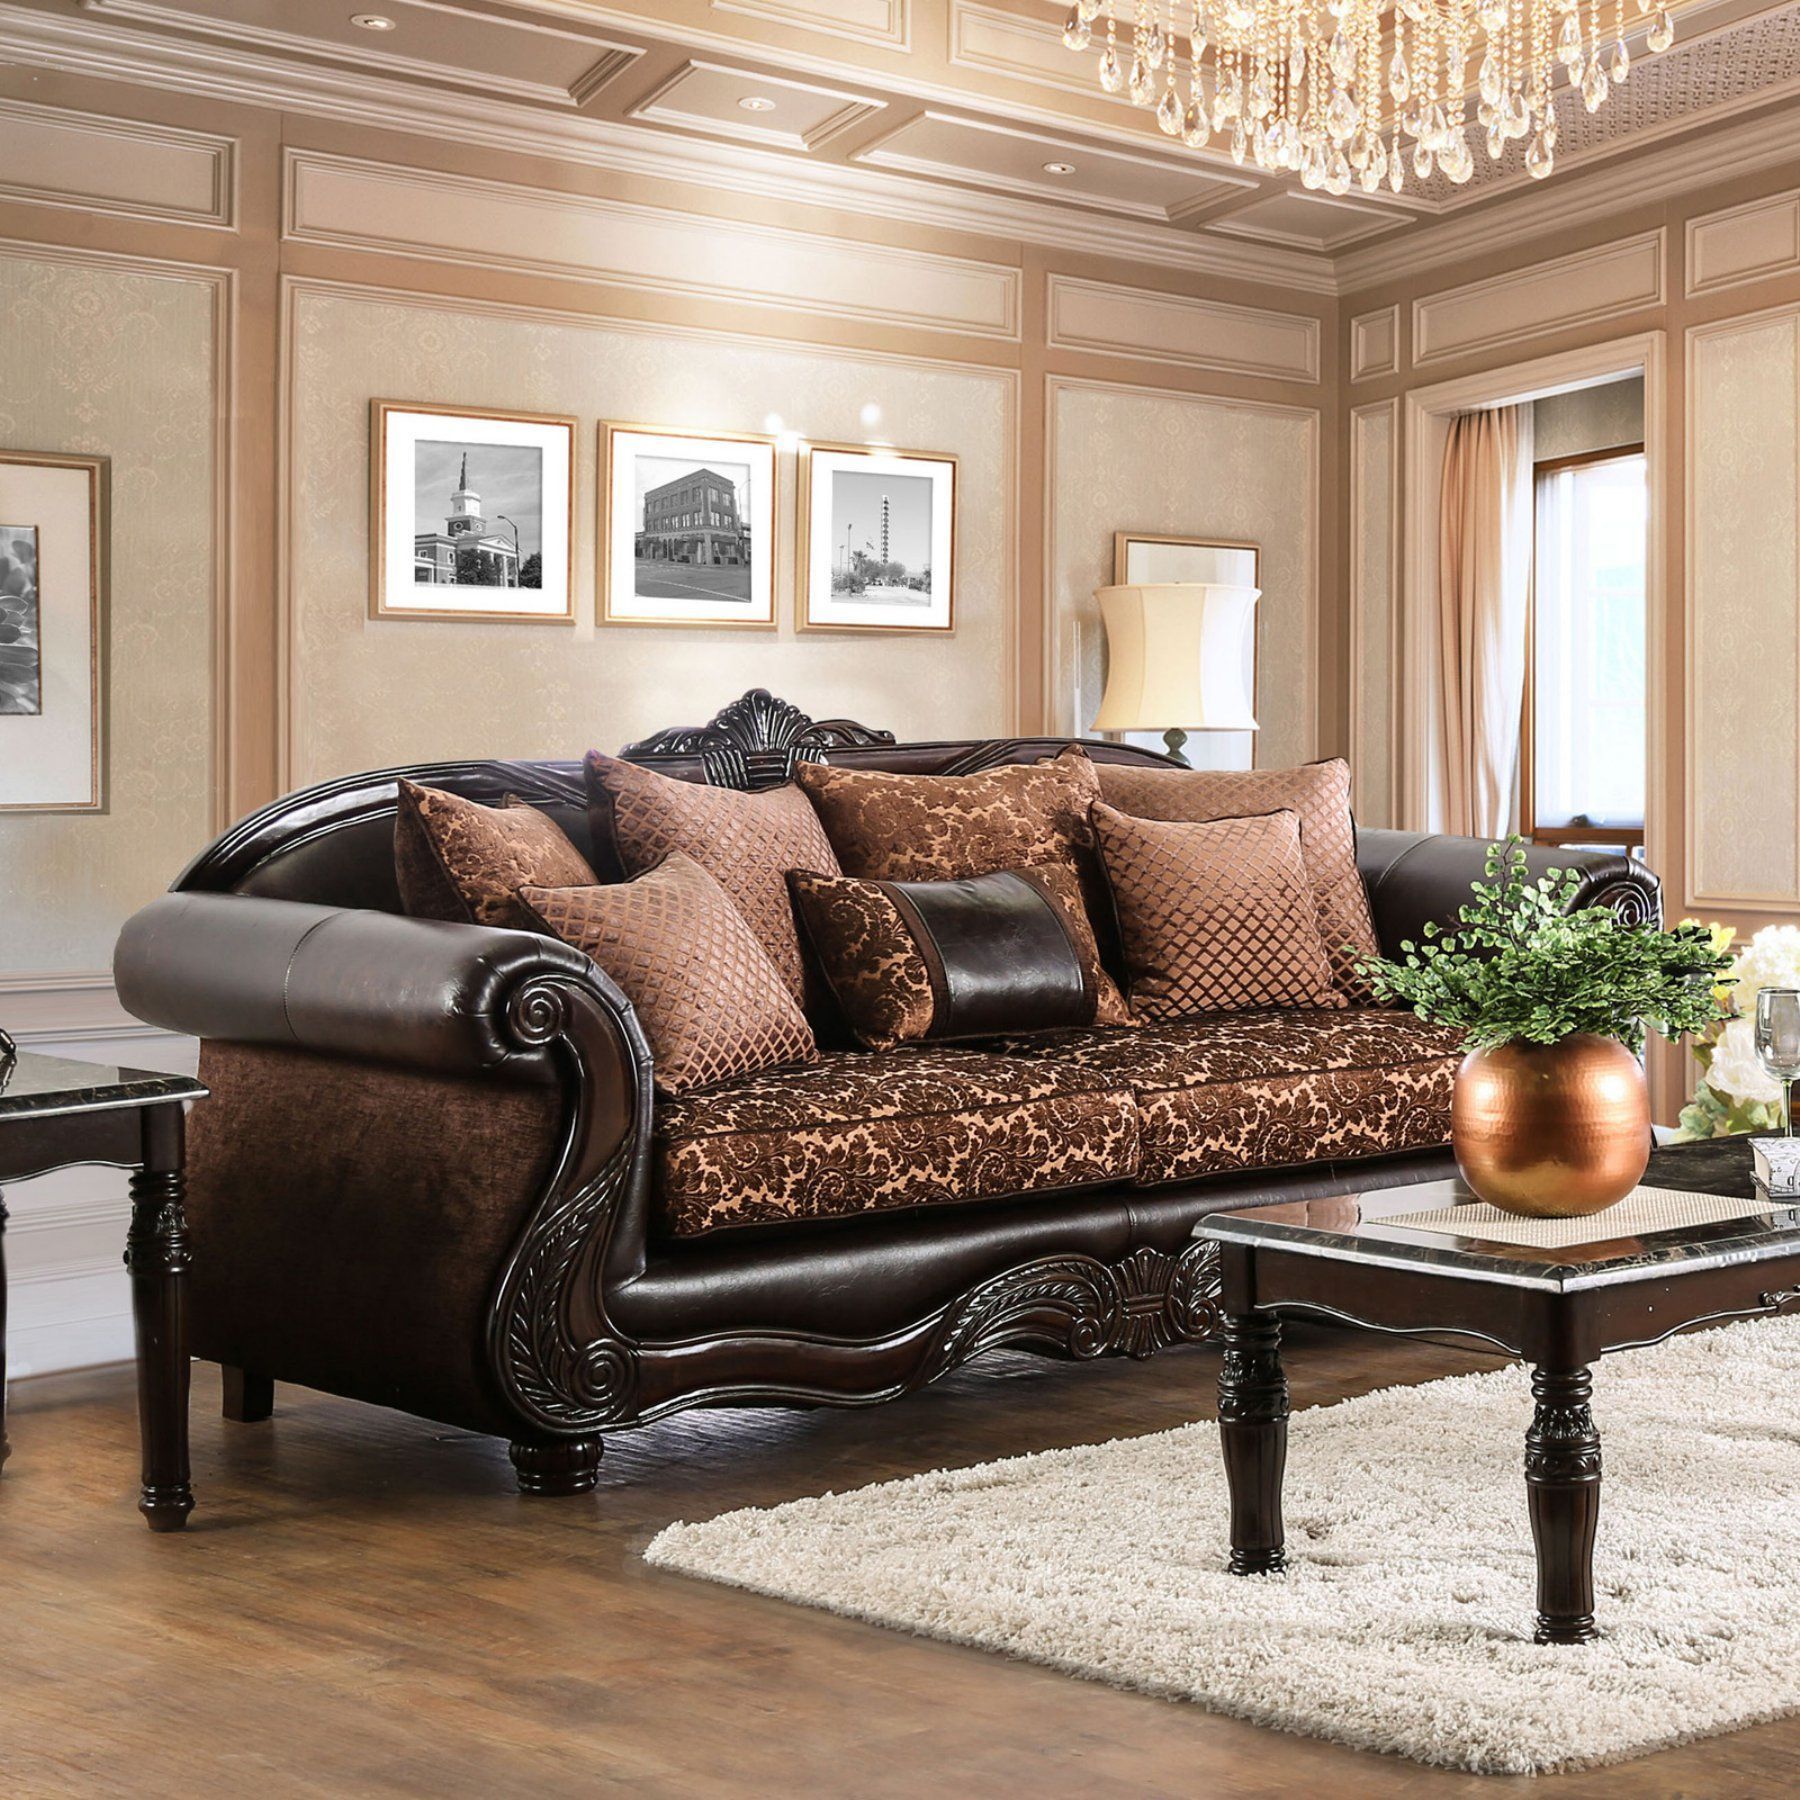 Furniture Of America Maldino Traditional Style Intricate Wood Carved With Sofas In Pattern (View 4 of 20)